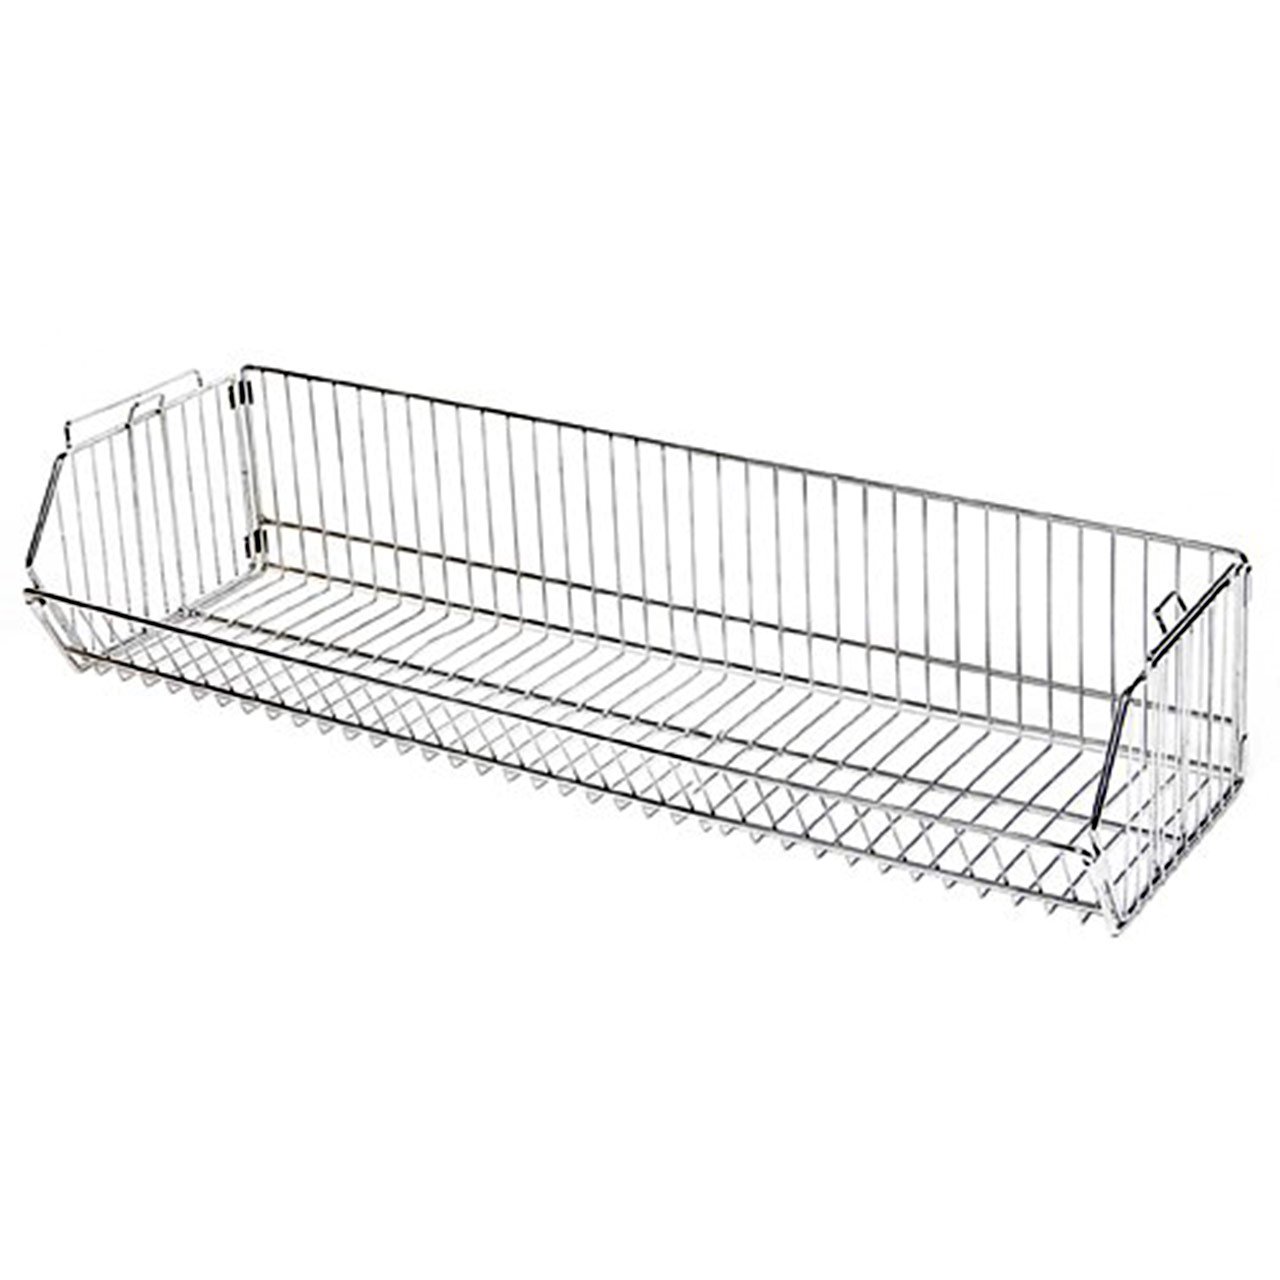 Modular wire baskets made of stainless steel